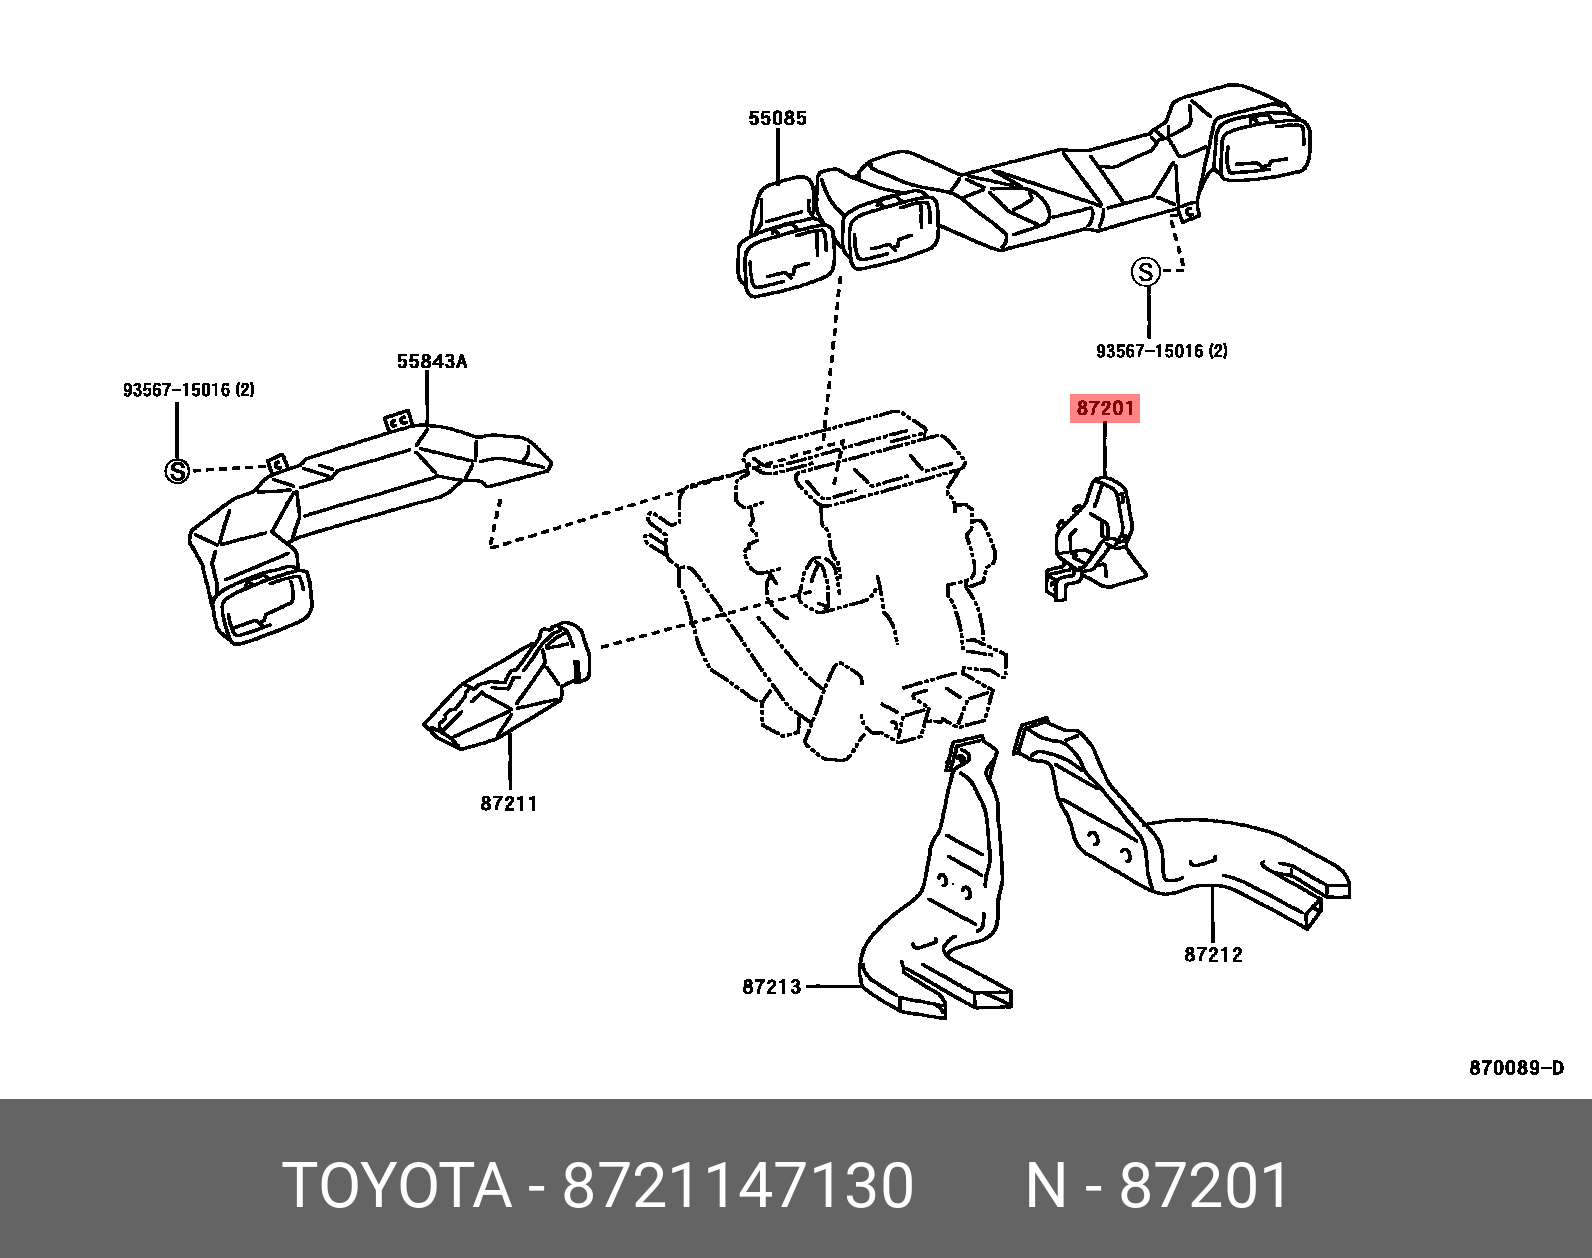 PRIUS (PLUG-IN) LEASE 200912 - 201010, DUCT SUB-ASSY, AIR, NO.1